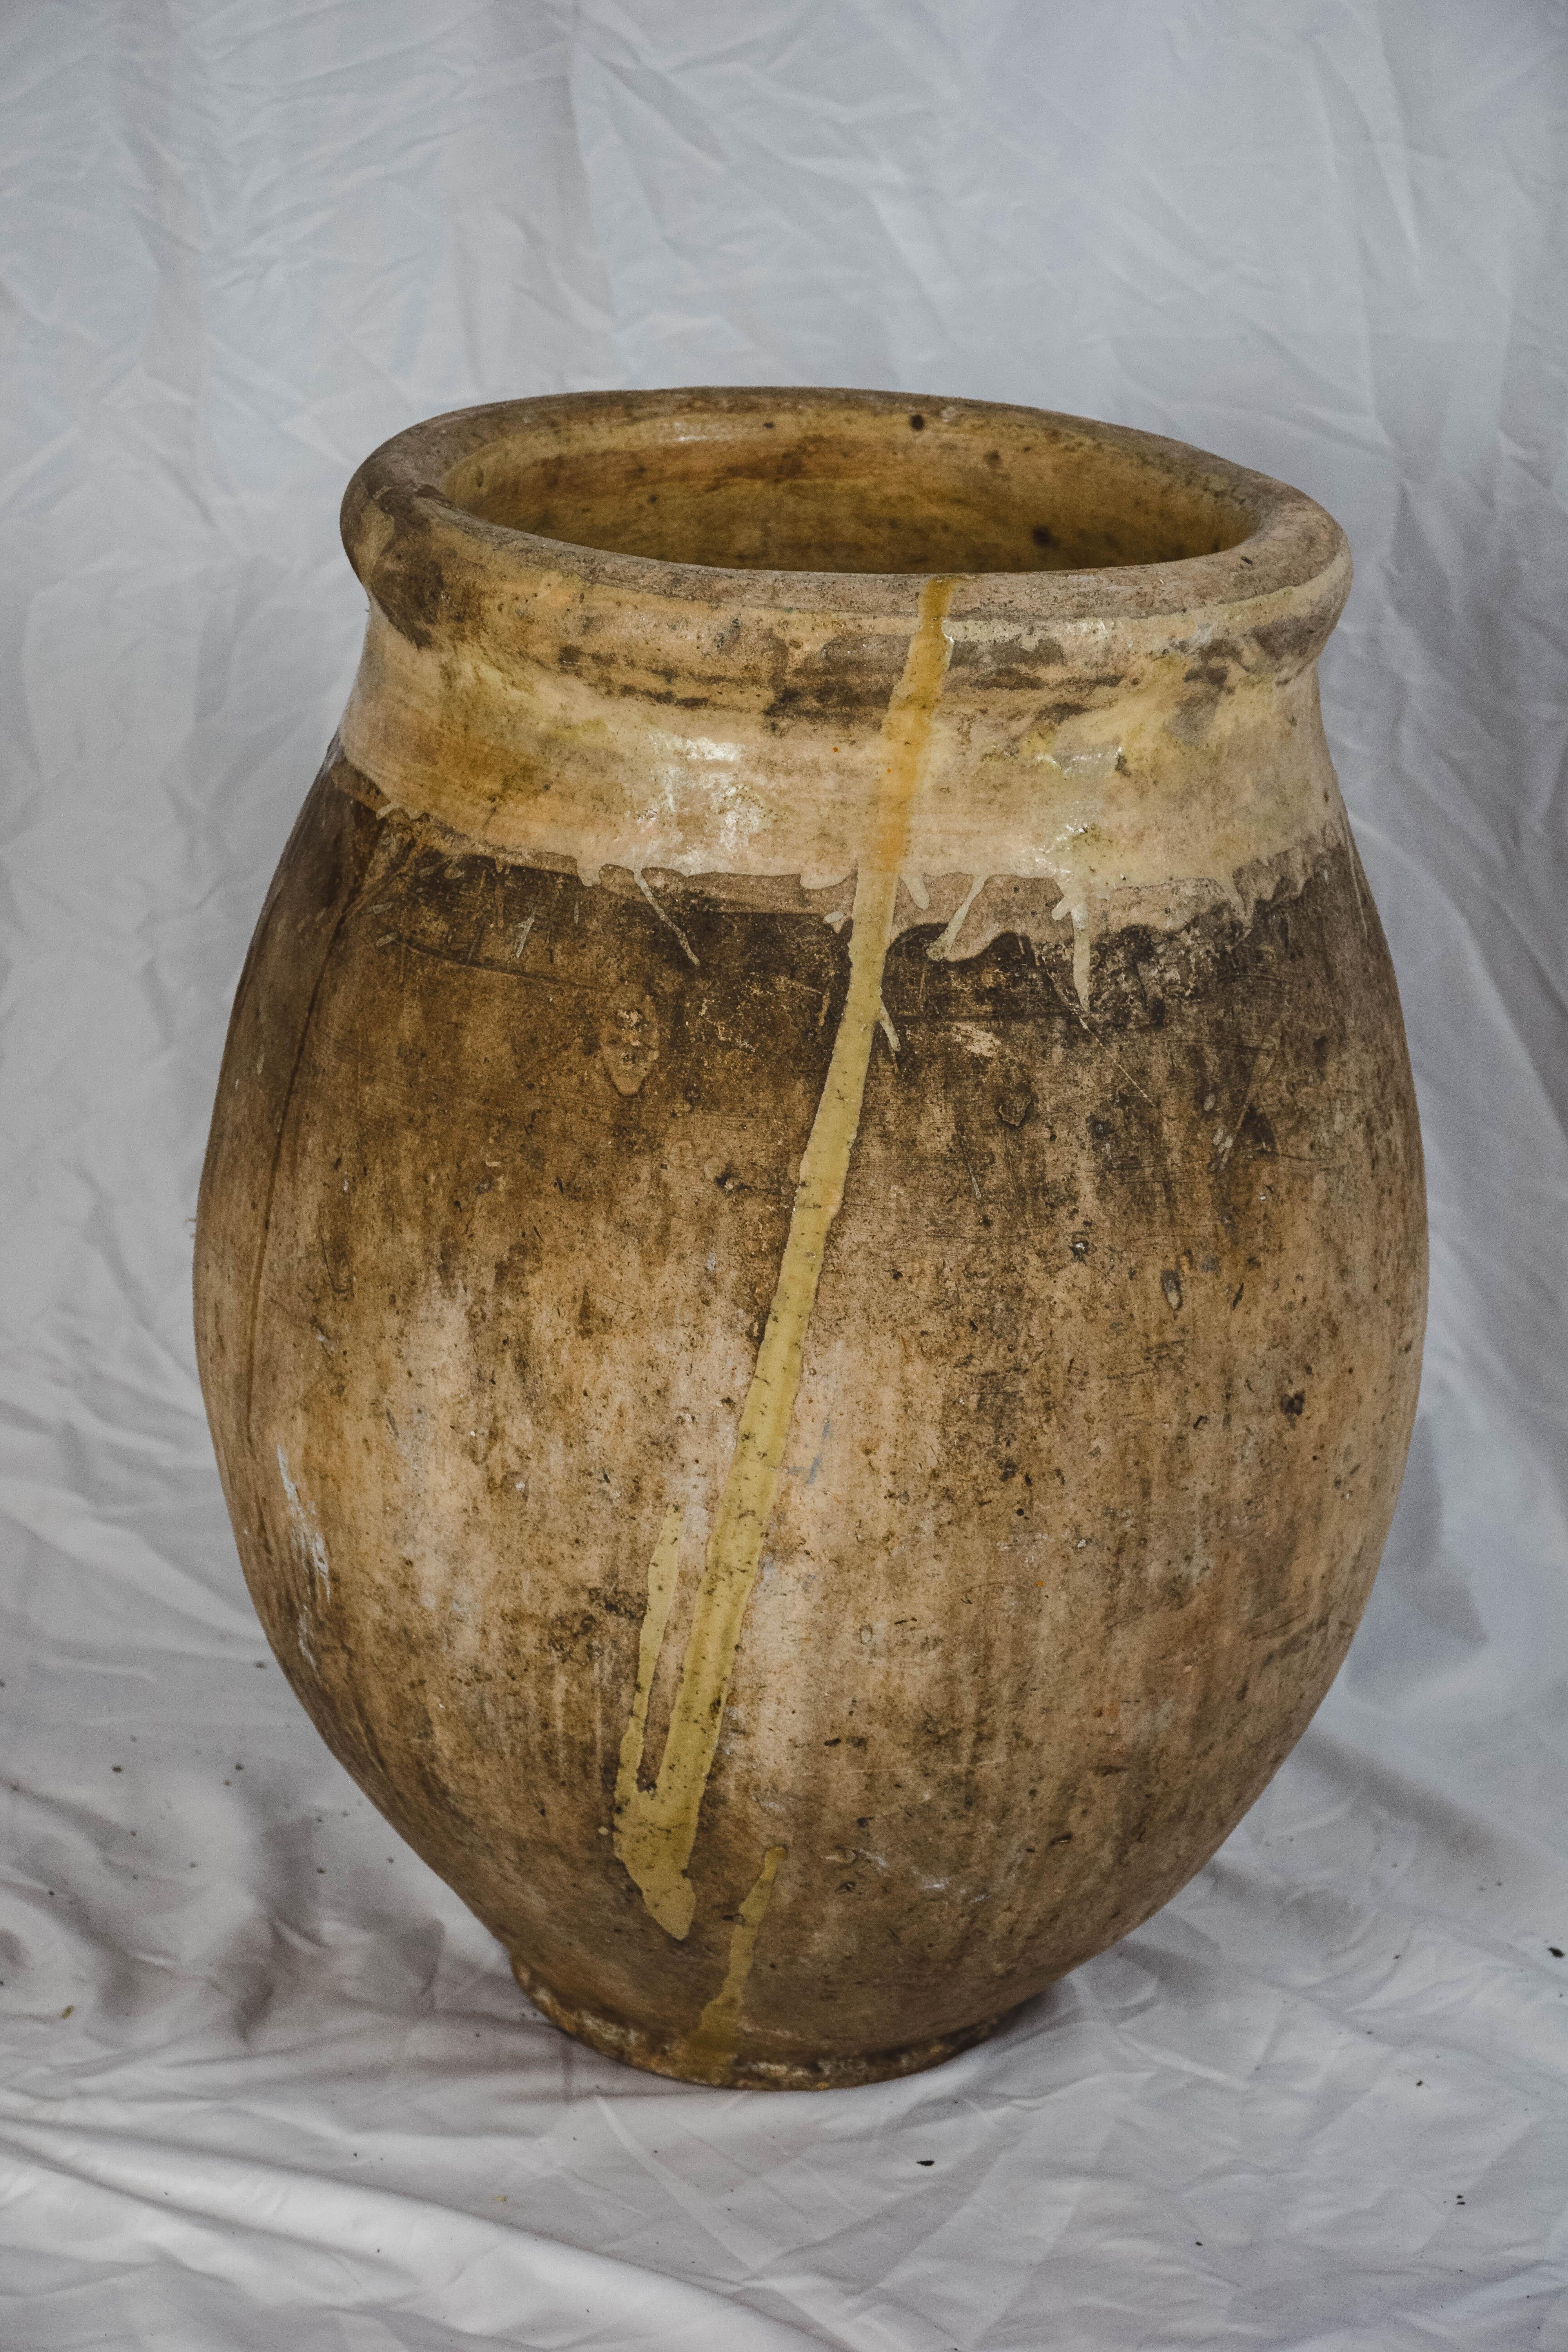 Found in Provence this 19th century French Biot Jar in traditional Biot shape has a lovely aged patina and pale yellow-glazed rolled edge and interior. This fabulous handmade terracotta jar originated in the Provençal town of Biot and was used to